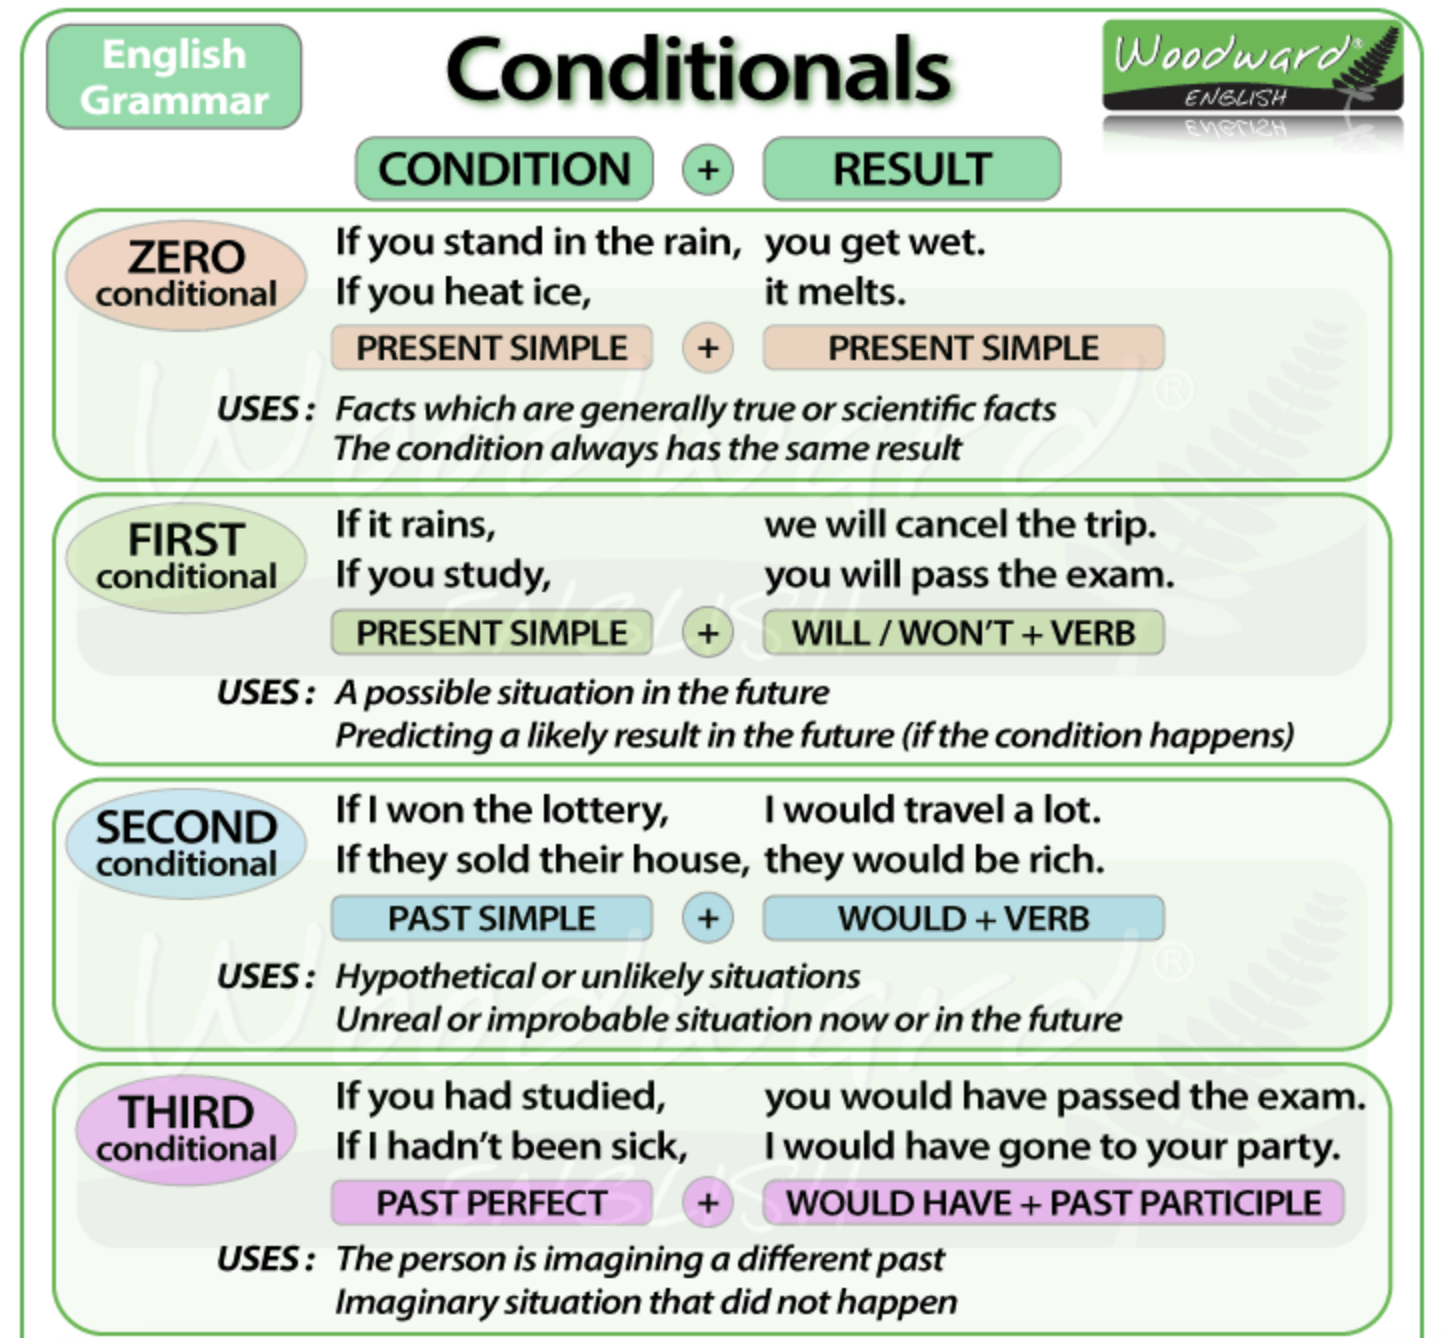 The january sales started and when. Английский 0 1 2 3 conditional. Conditionals в английском 0 1 2. Conditionals в английском 2 3. 0-3 Conditional в английском языке.